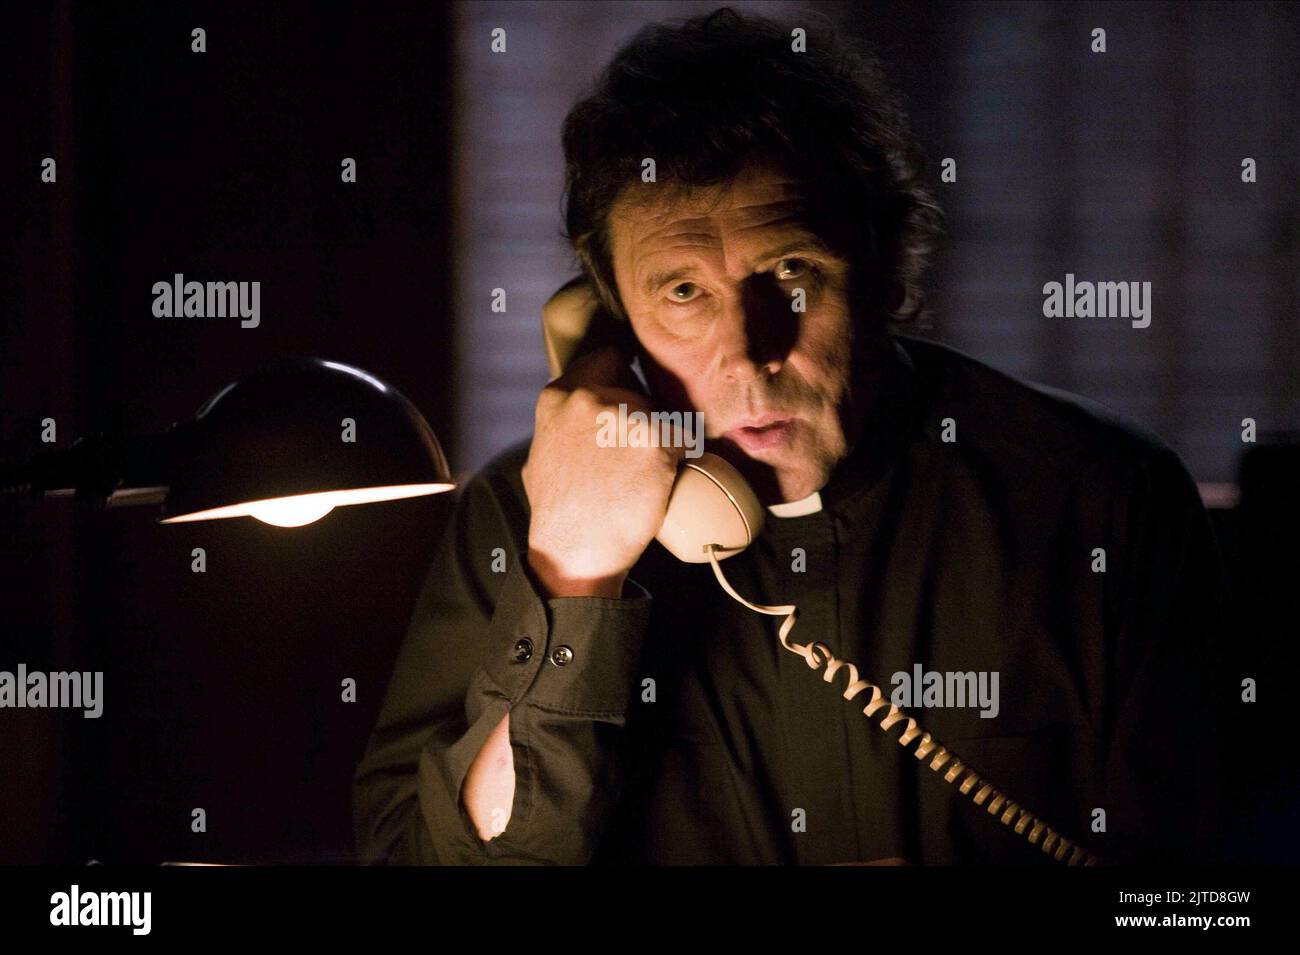 STEPHEN REA, THE REAPING, 2007 Stock Photo